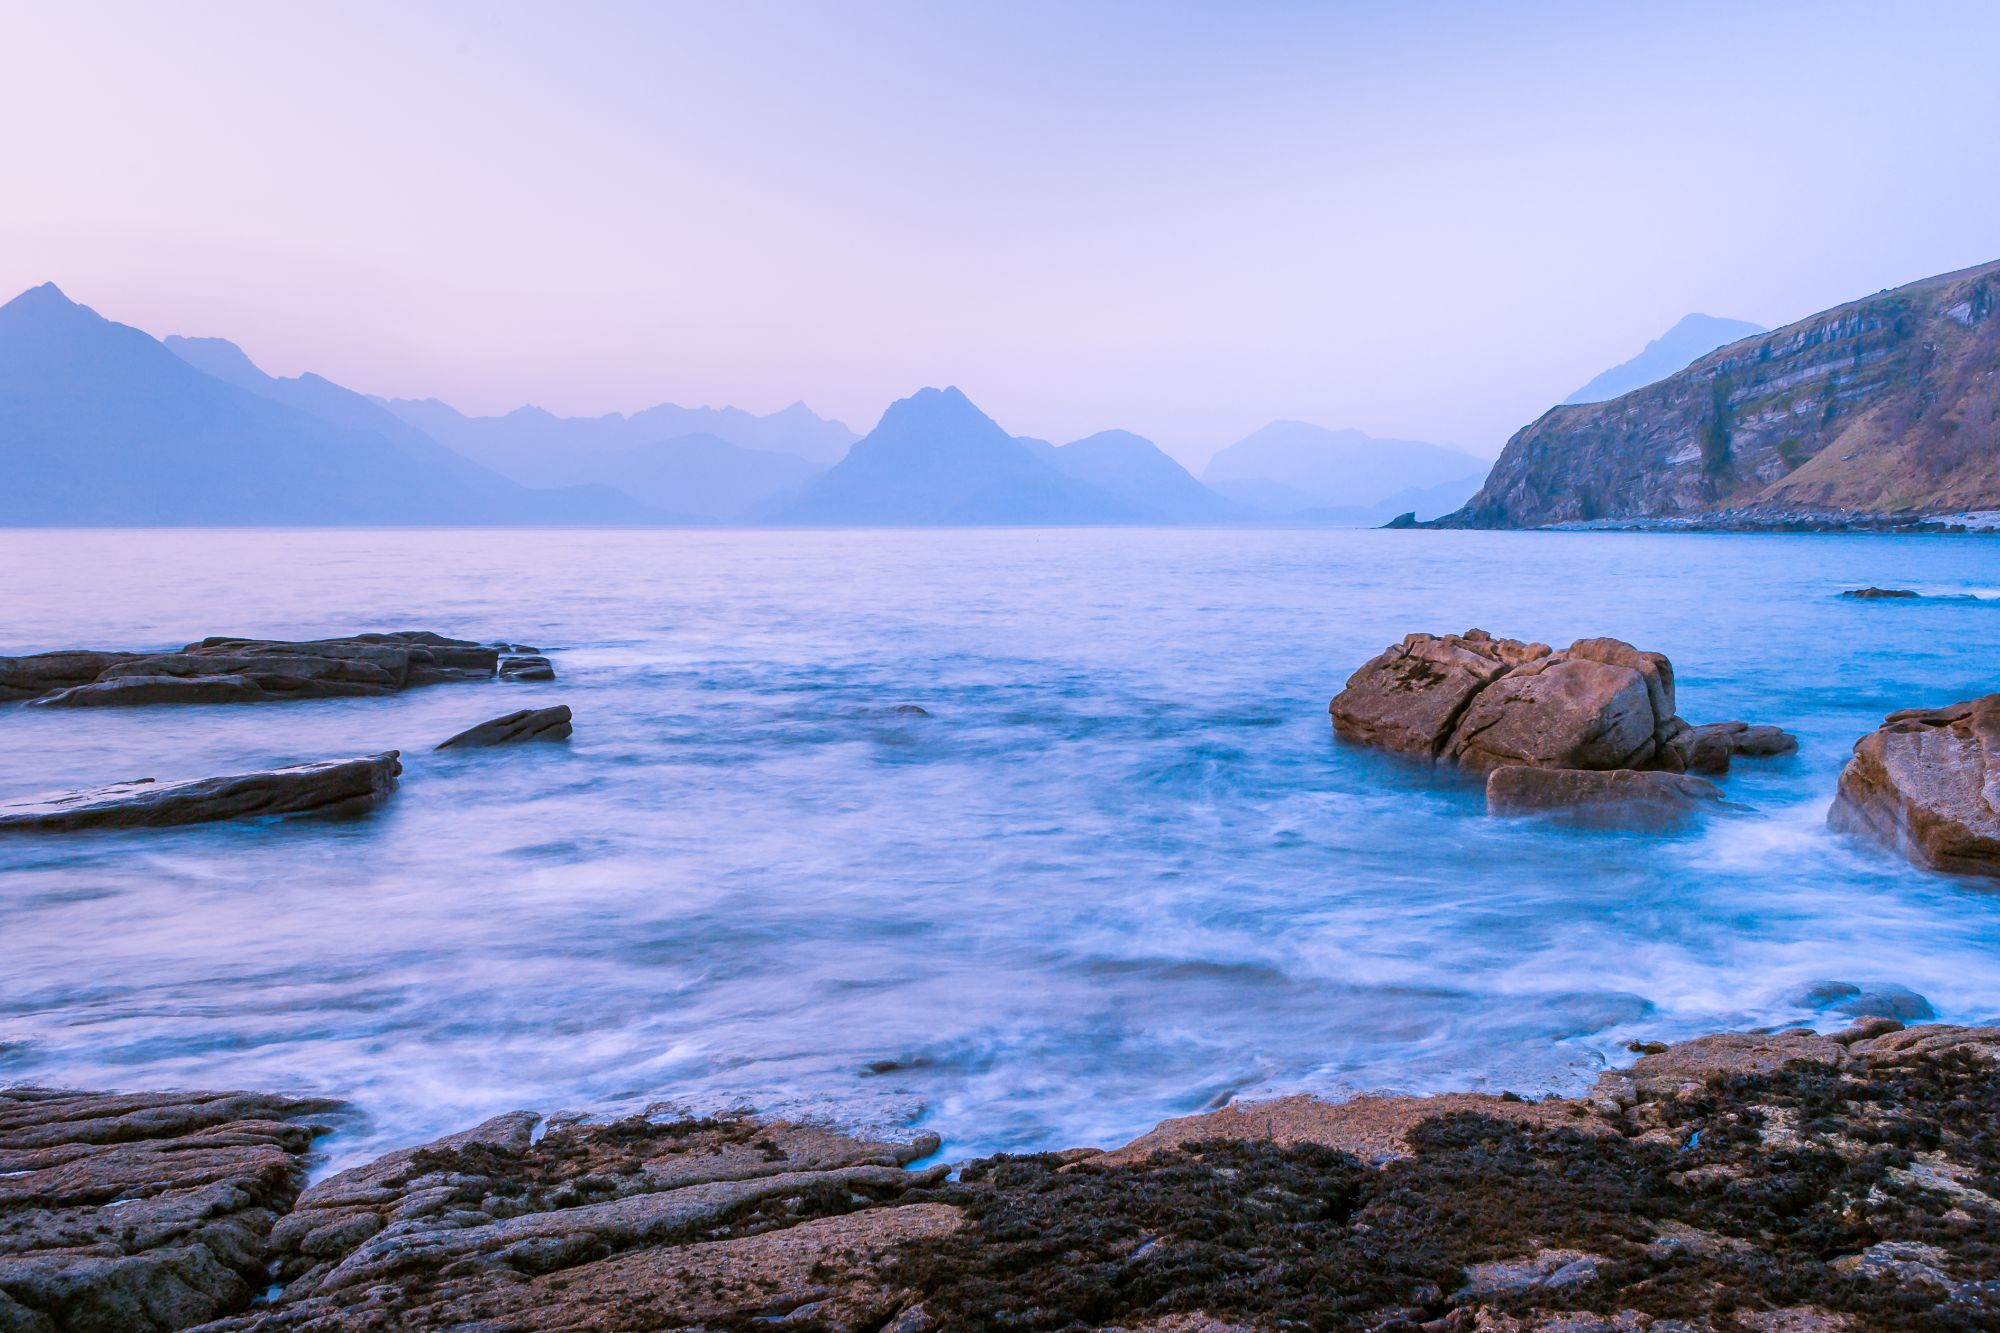 Elgol Beach at blue hour - the sea has been slowed down in camera to create a lovely swirling effect. The Cuillin mountains can be seen in the distance and there's a few rocks in the foreground